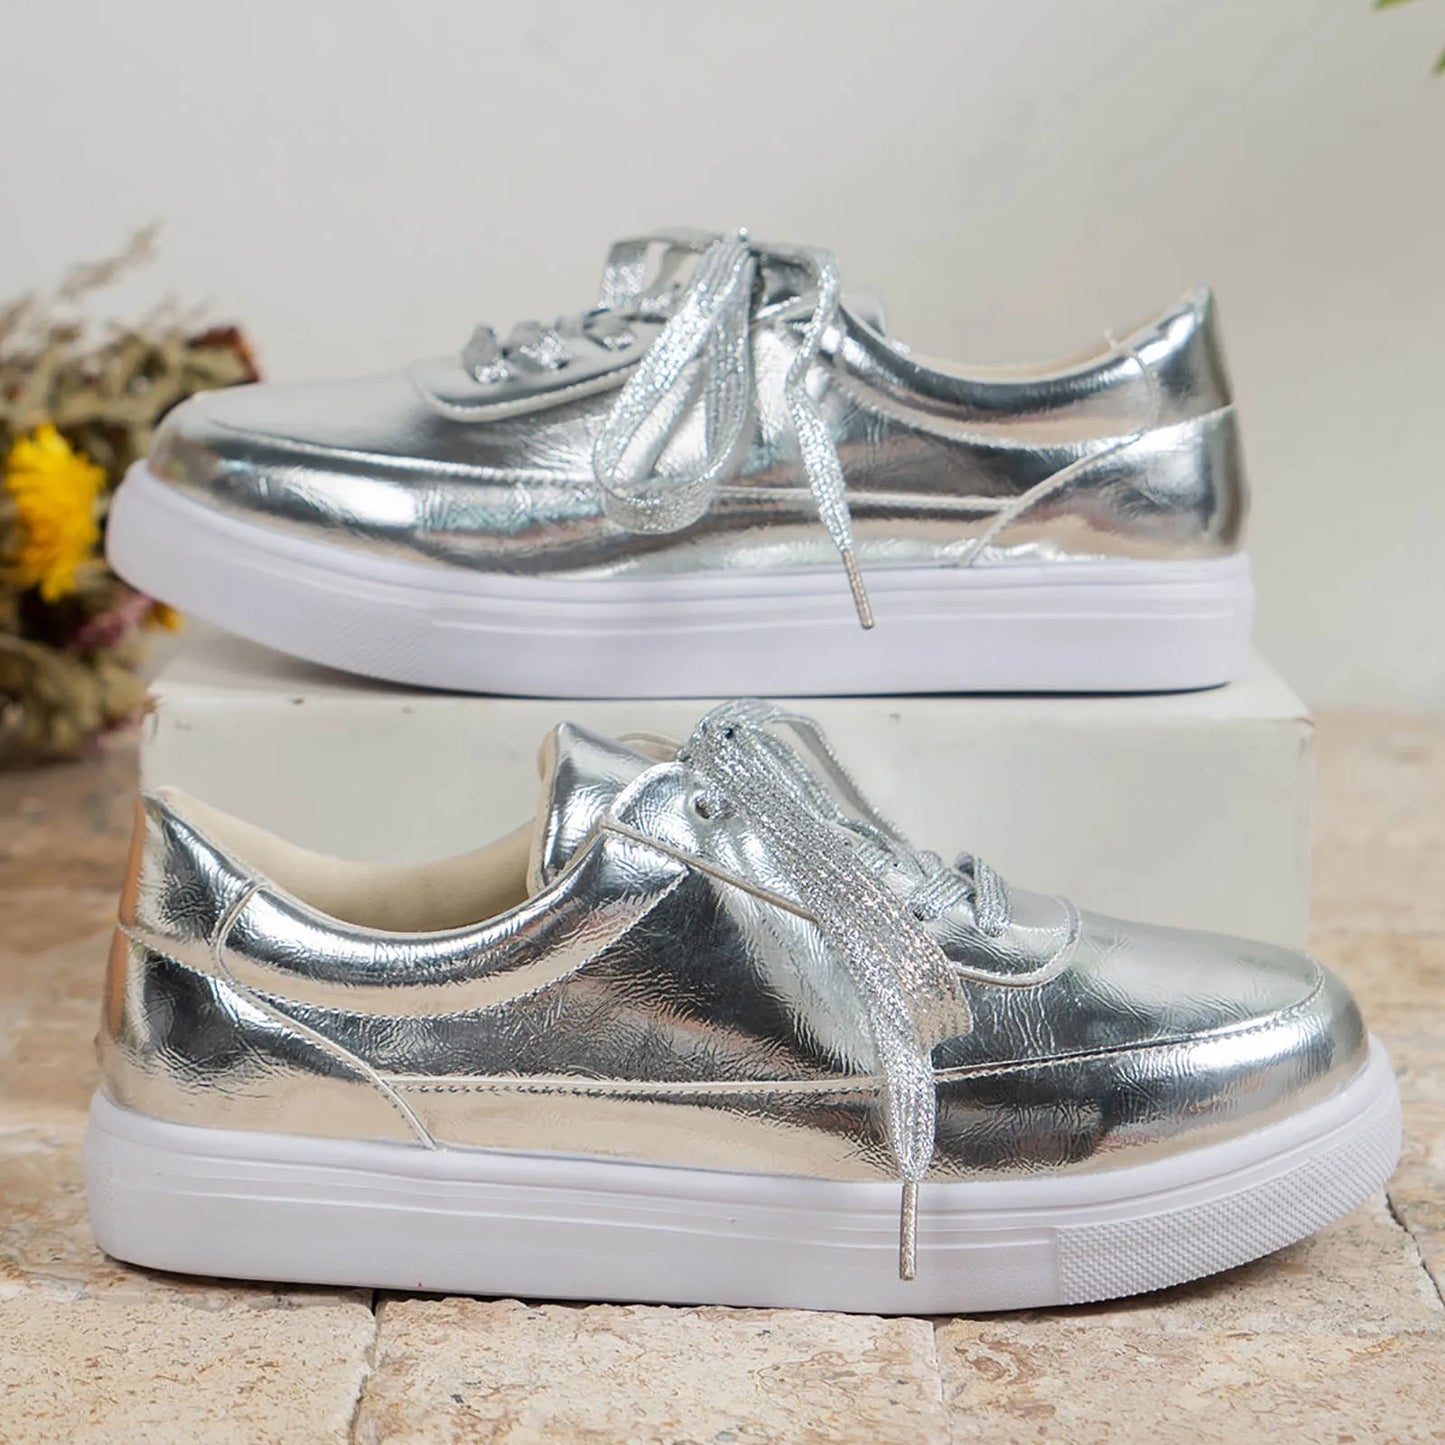 Silver Boat Shoes For Women Thick Platform/Casual Sneakers Height Increasing Lace Up Footwear